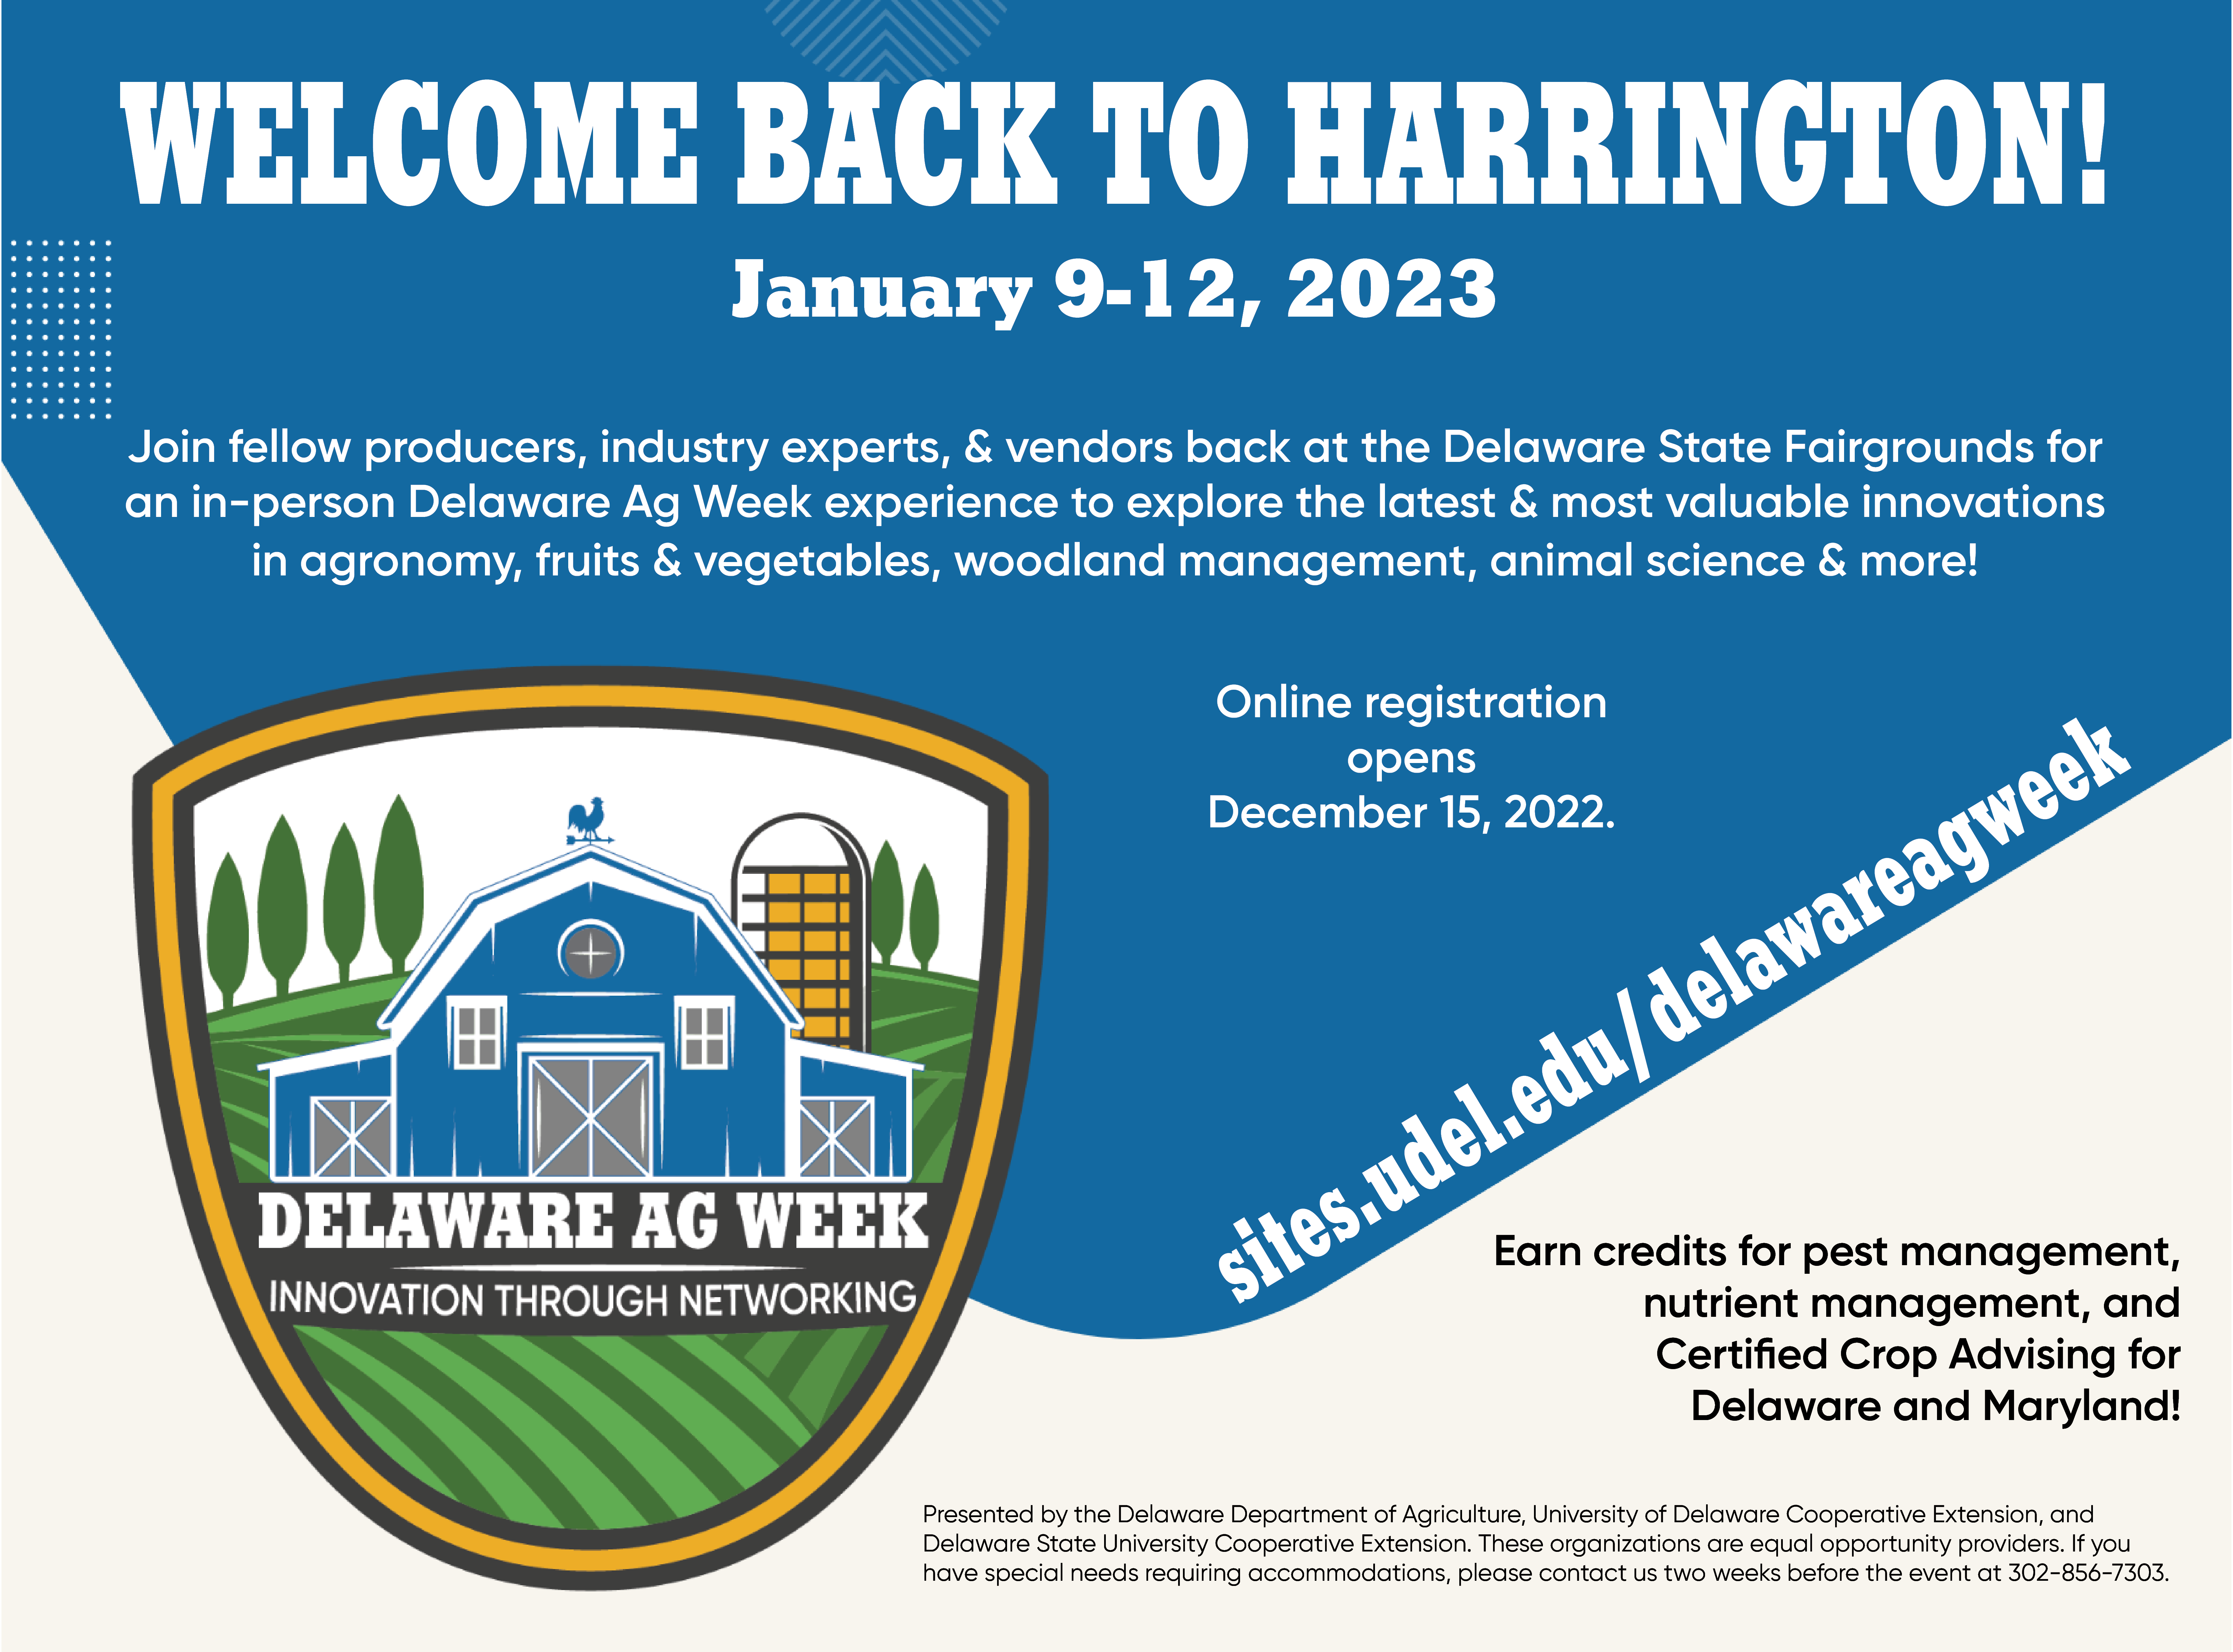 Welcome Back to Harrington! January 9-12, 2023,. Join fellow producers, industry experts, & vendors back at the Delaware State Fairgrounds for an in-person Delaware Ag Week experience to explore the latest & most valuable innovations in agronomy, fruits & vegetables, woodland management, animal science & more! Online registration opens December 15, 2022. sites.udel.edu/delawareagweek Earn credits for pest management, nutrient management, and Certified Crop Advising for Delaware and Maryland! Presented by the Delaware Department of Agriculture, University of Delaware Cooperative Extension, and Delaware State University Cooperative Extension. These organizations are equal opportunity providers. If you have special needs requiring accommodations, please contact us two weeks before the event at 302-856-7303.